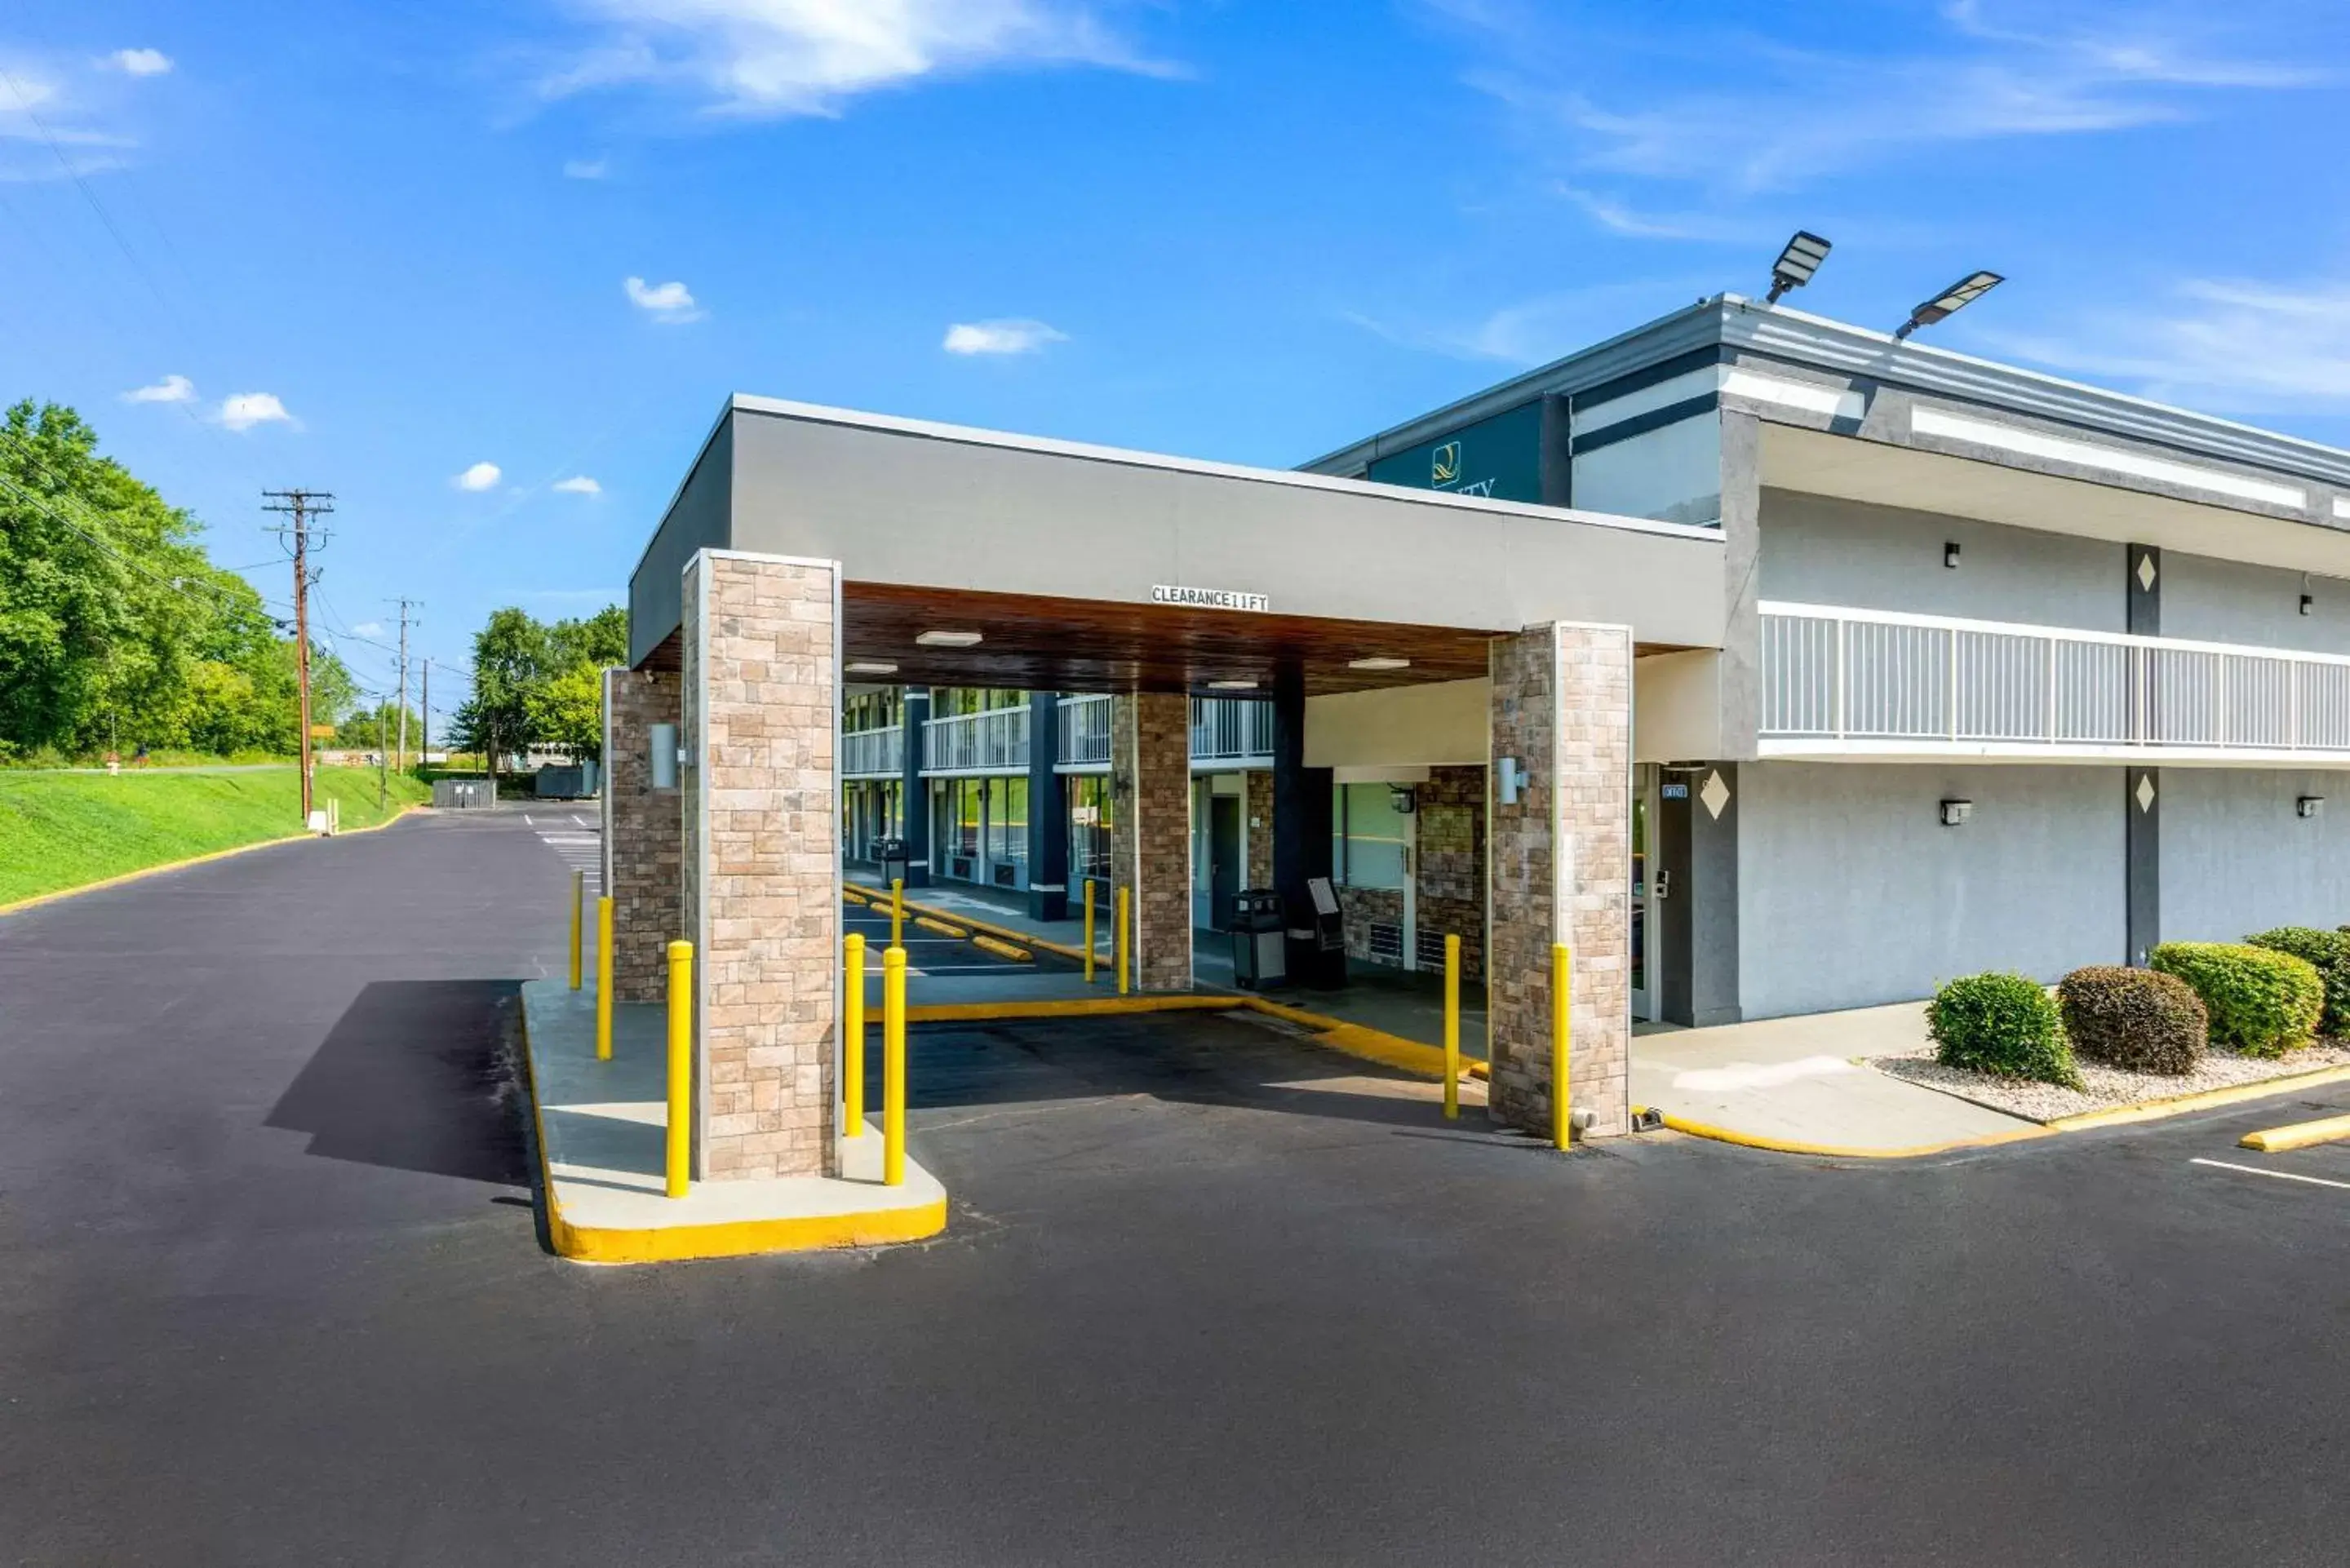 Property building in Quality Inn Concord Kannapolis